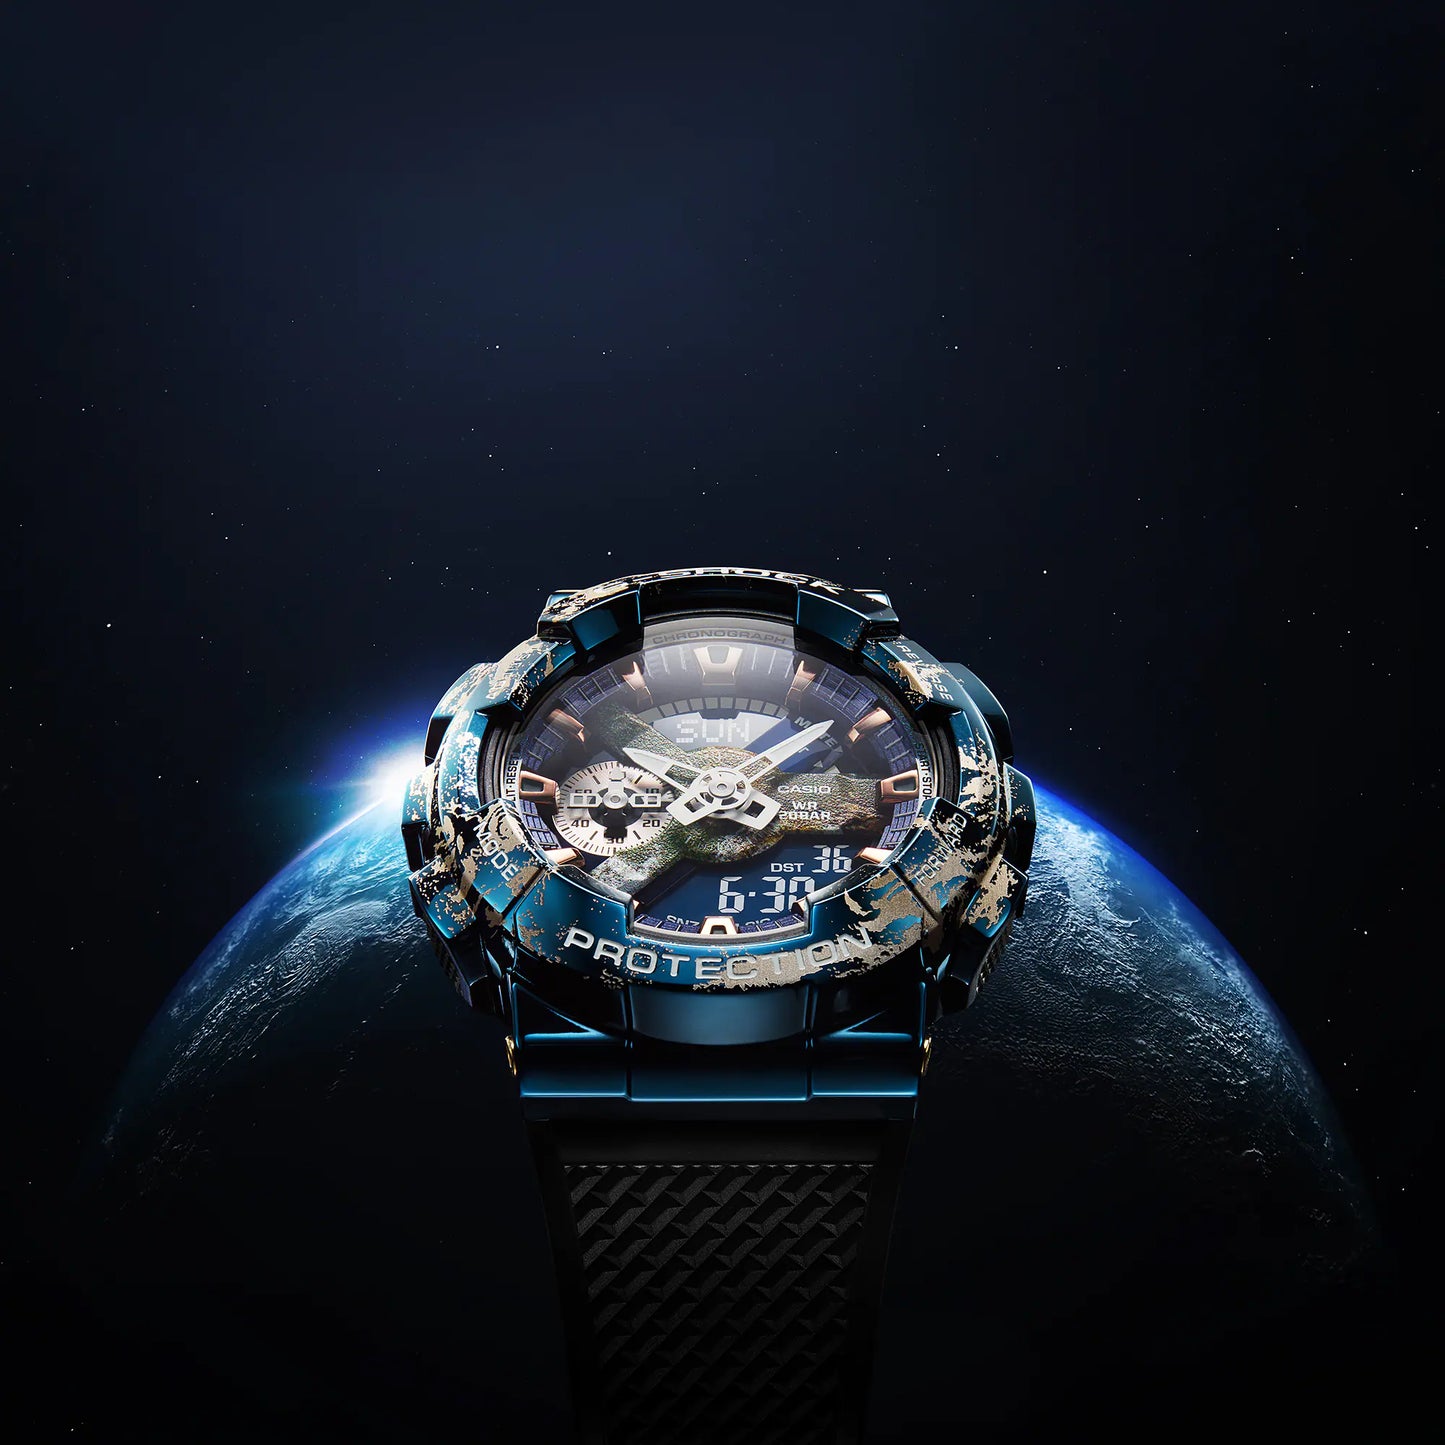 Casio G-Shock Metal Covered GM-110 Series Watch 'Planet Earth' xld